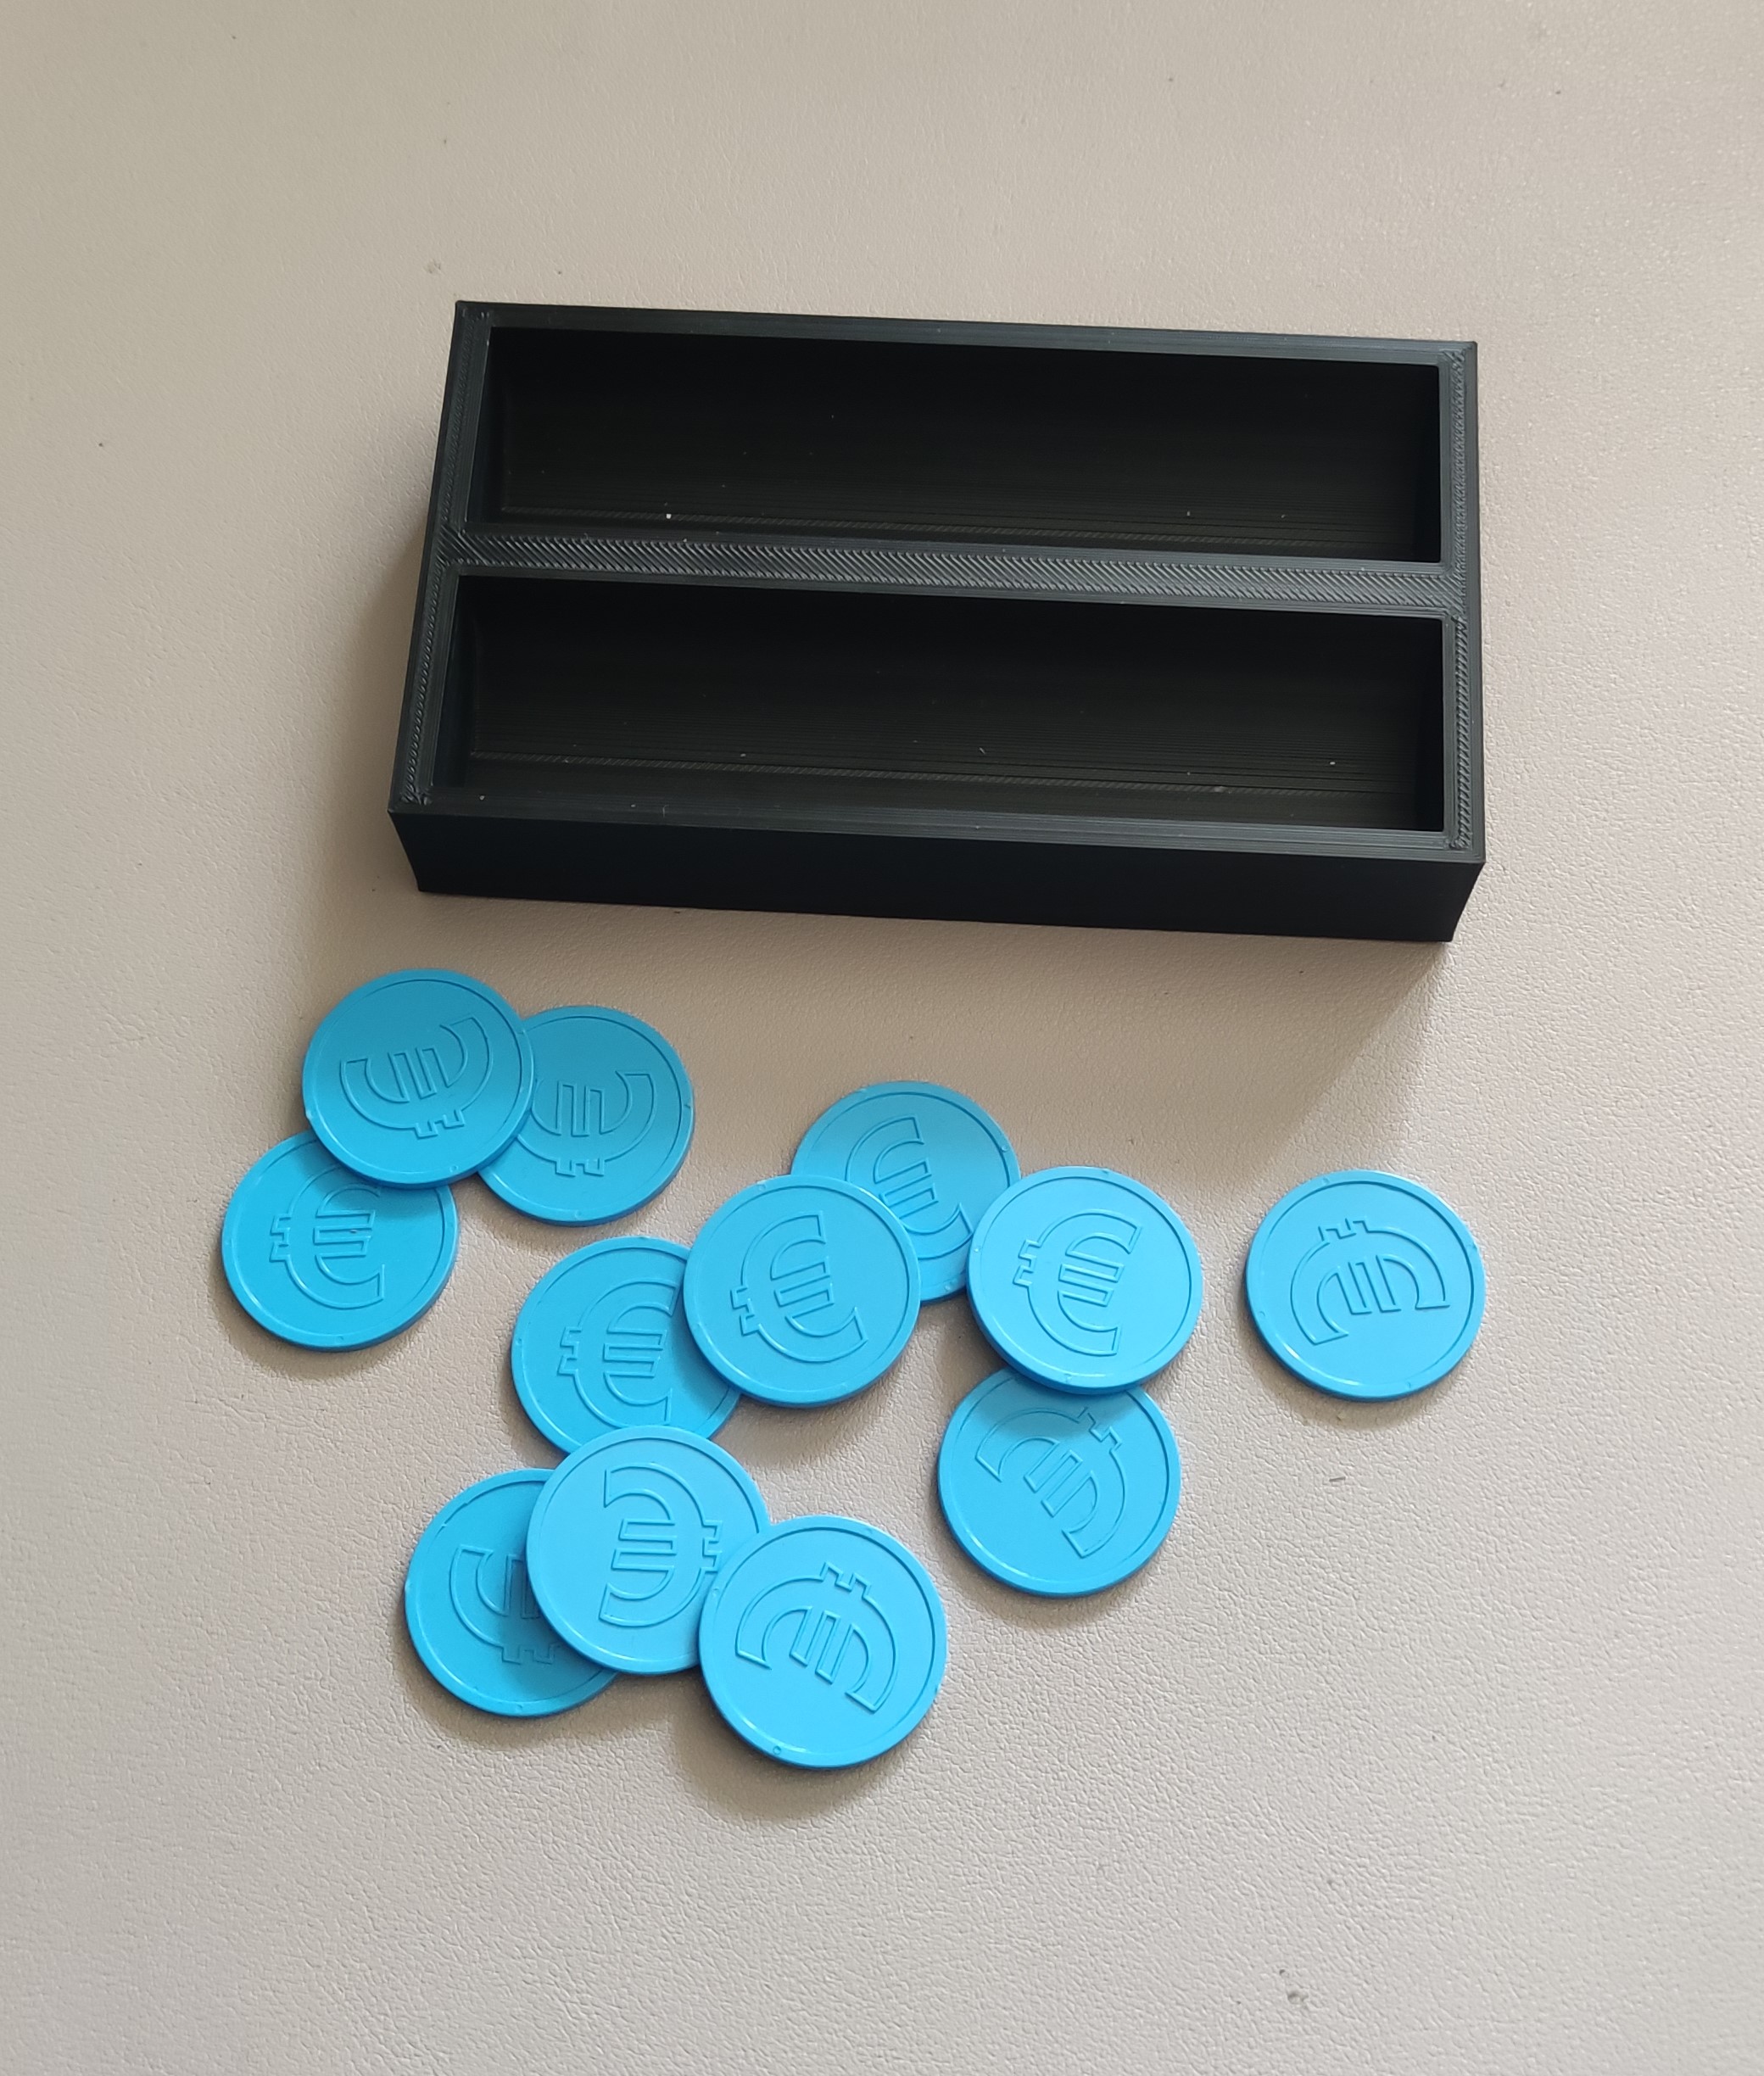 Box of 100 tokens